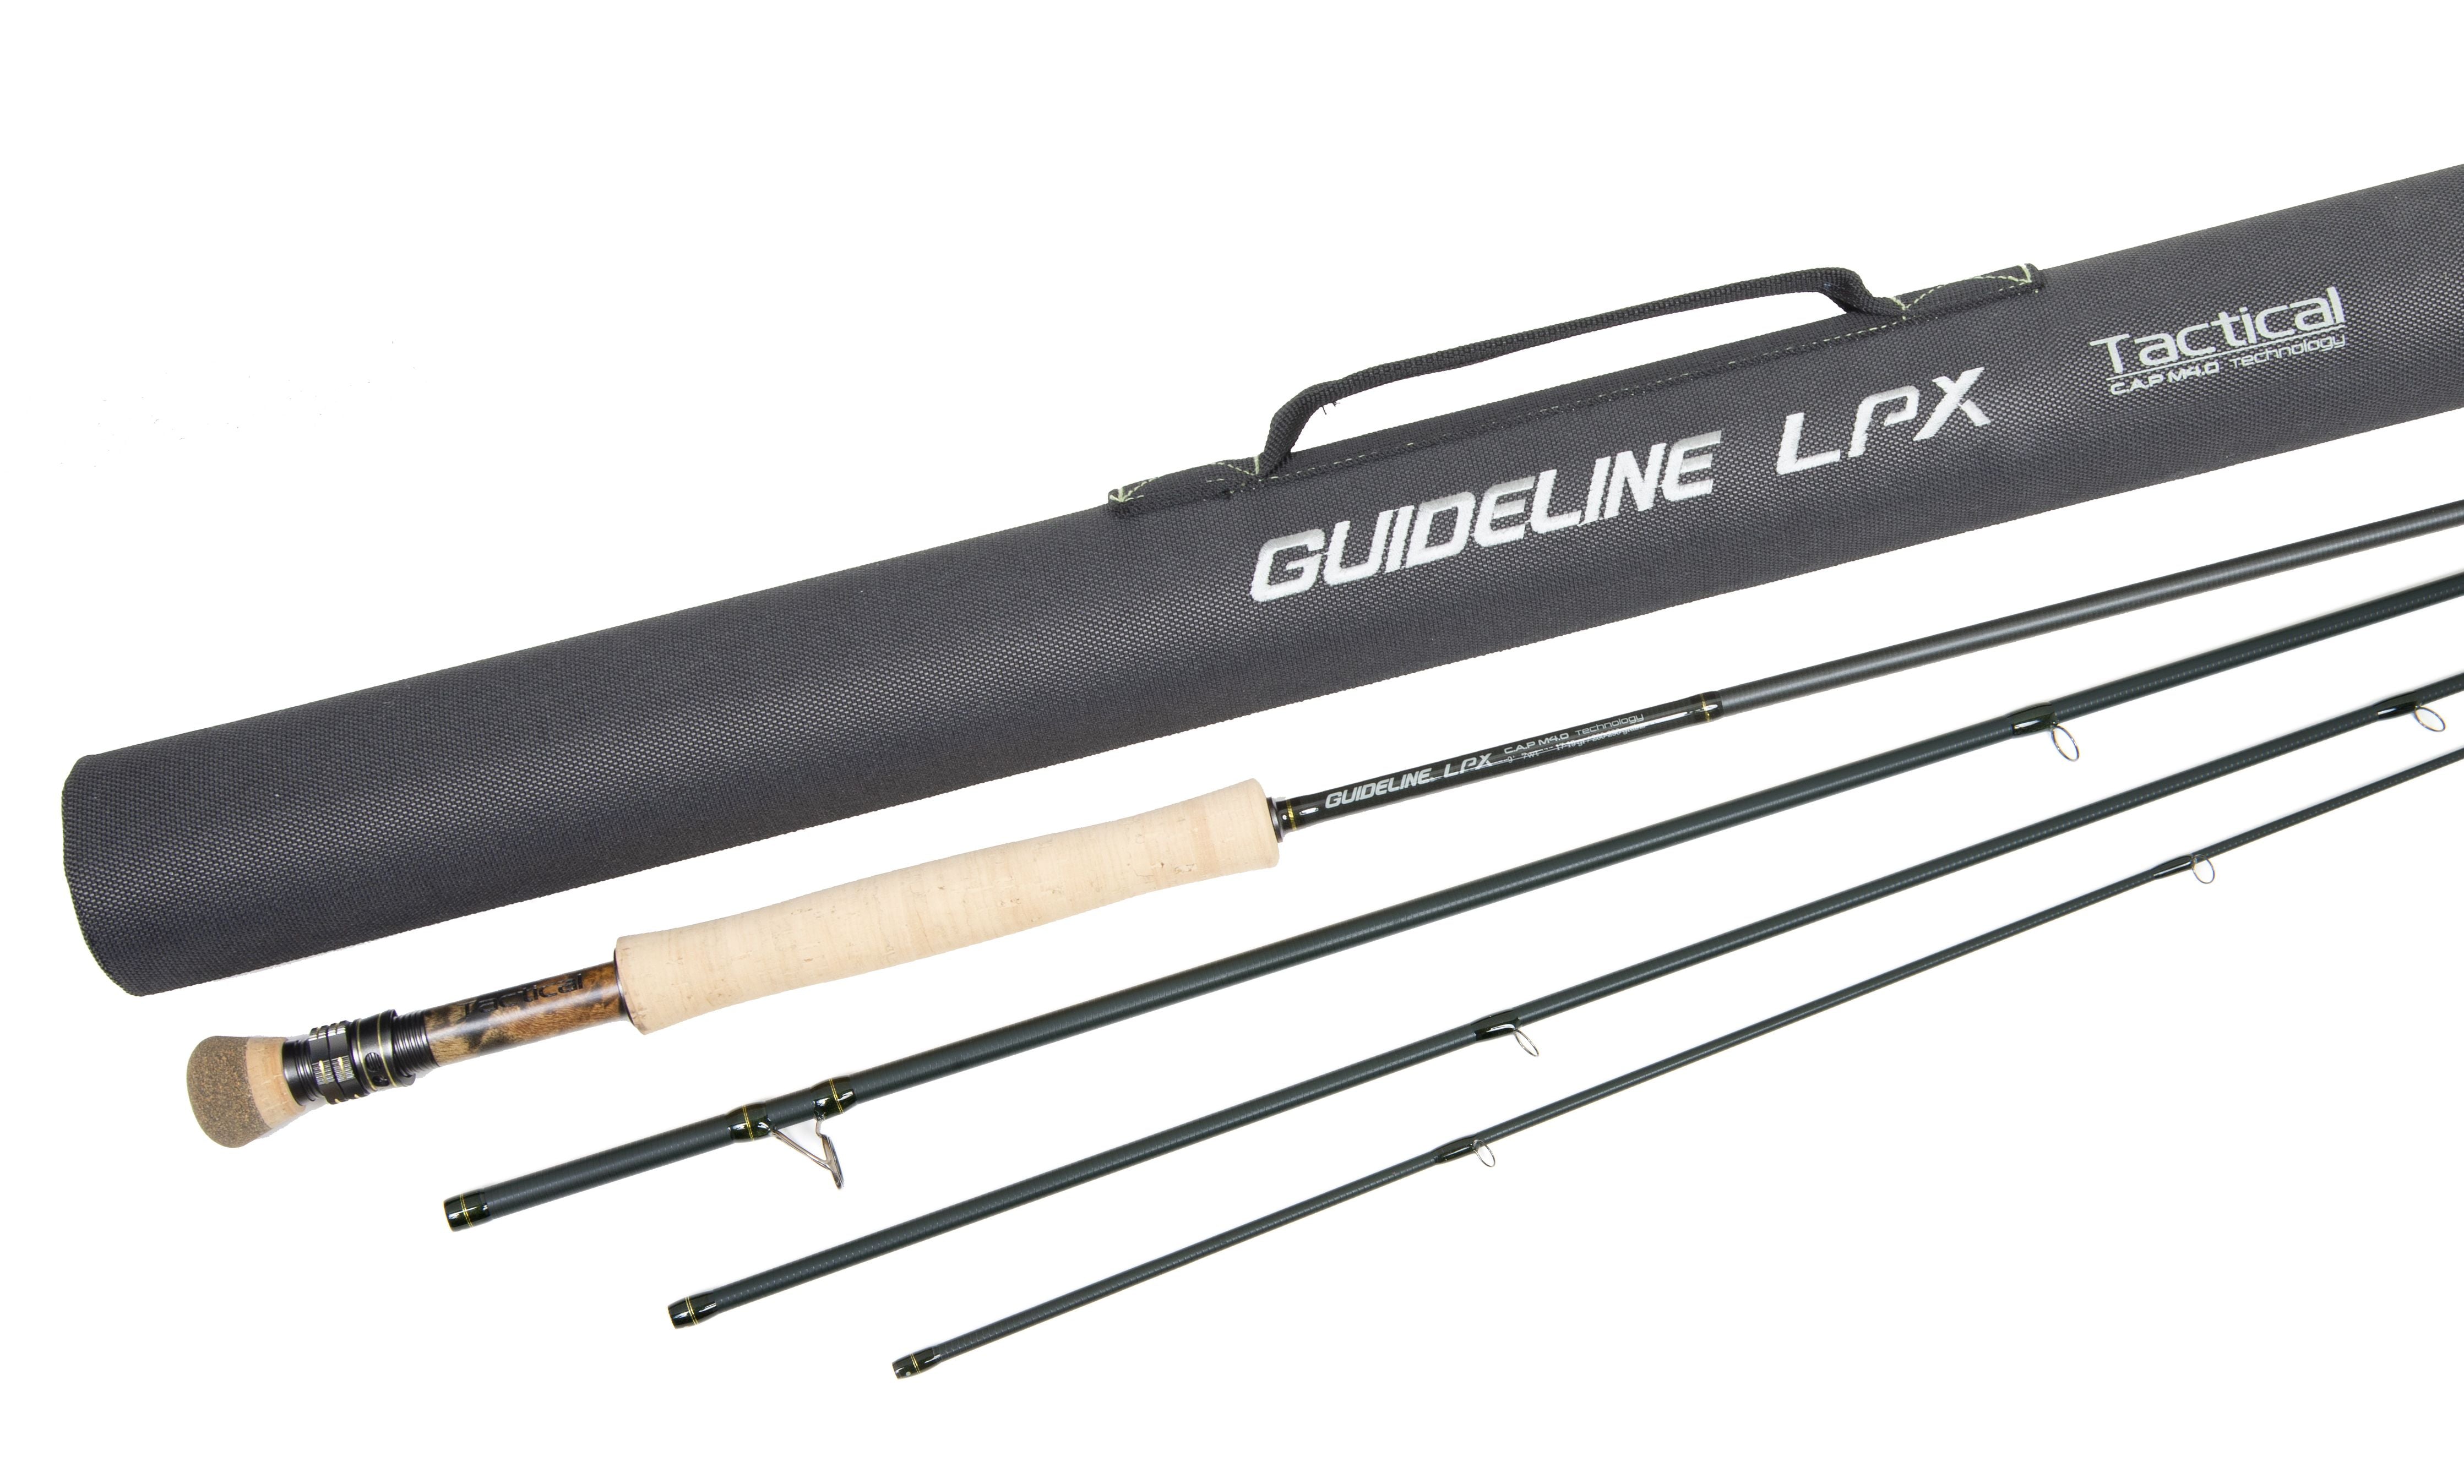 Guideline Elevation Nymph - Rod & Reel Outfit